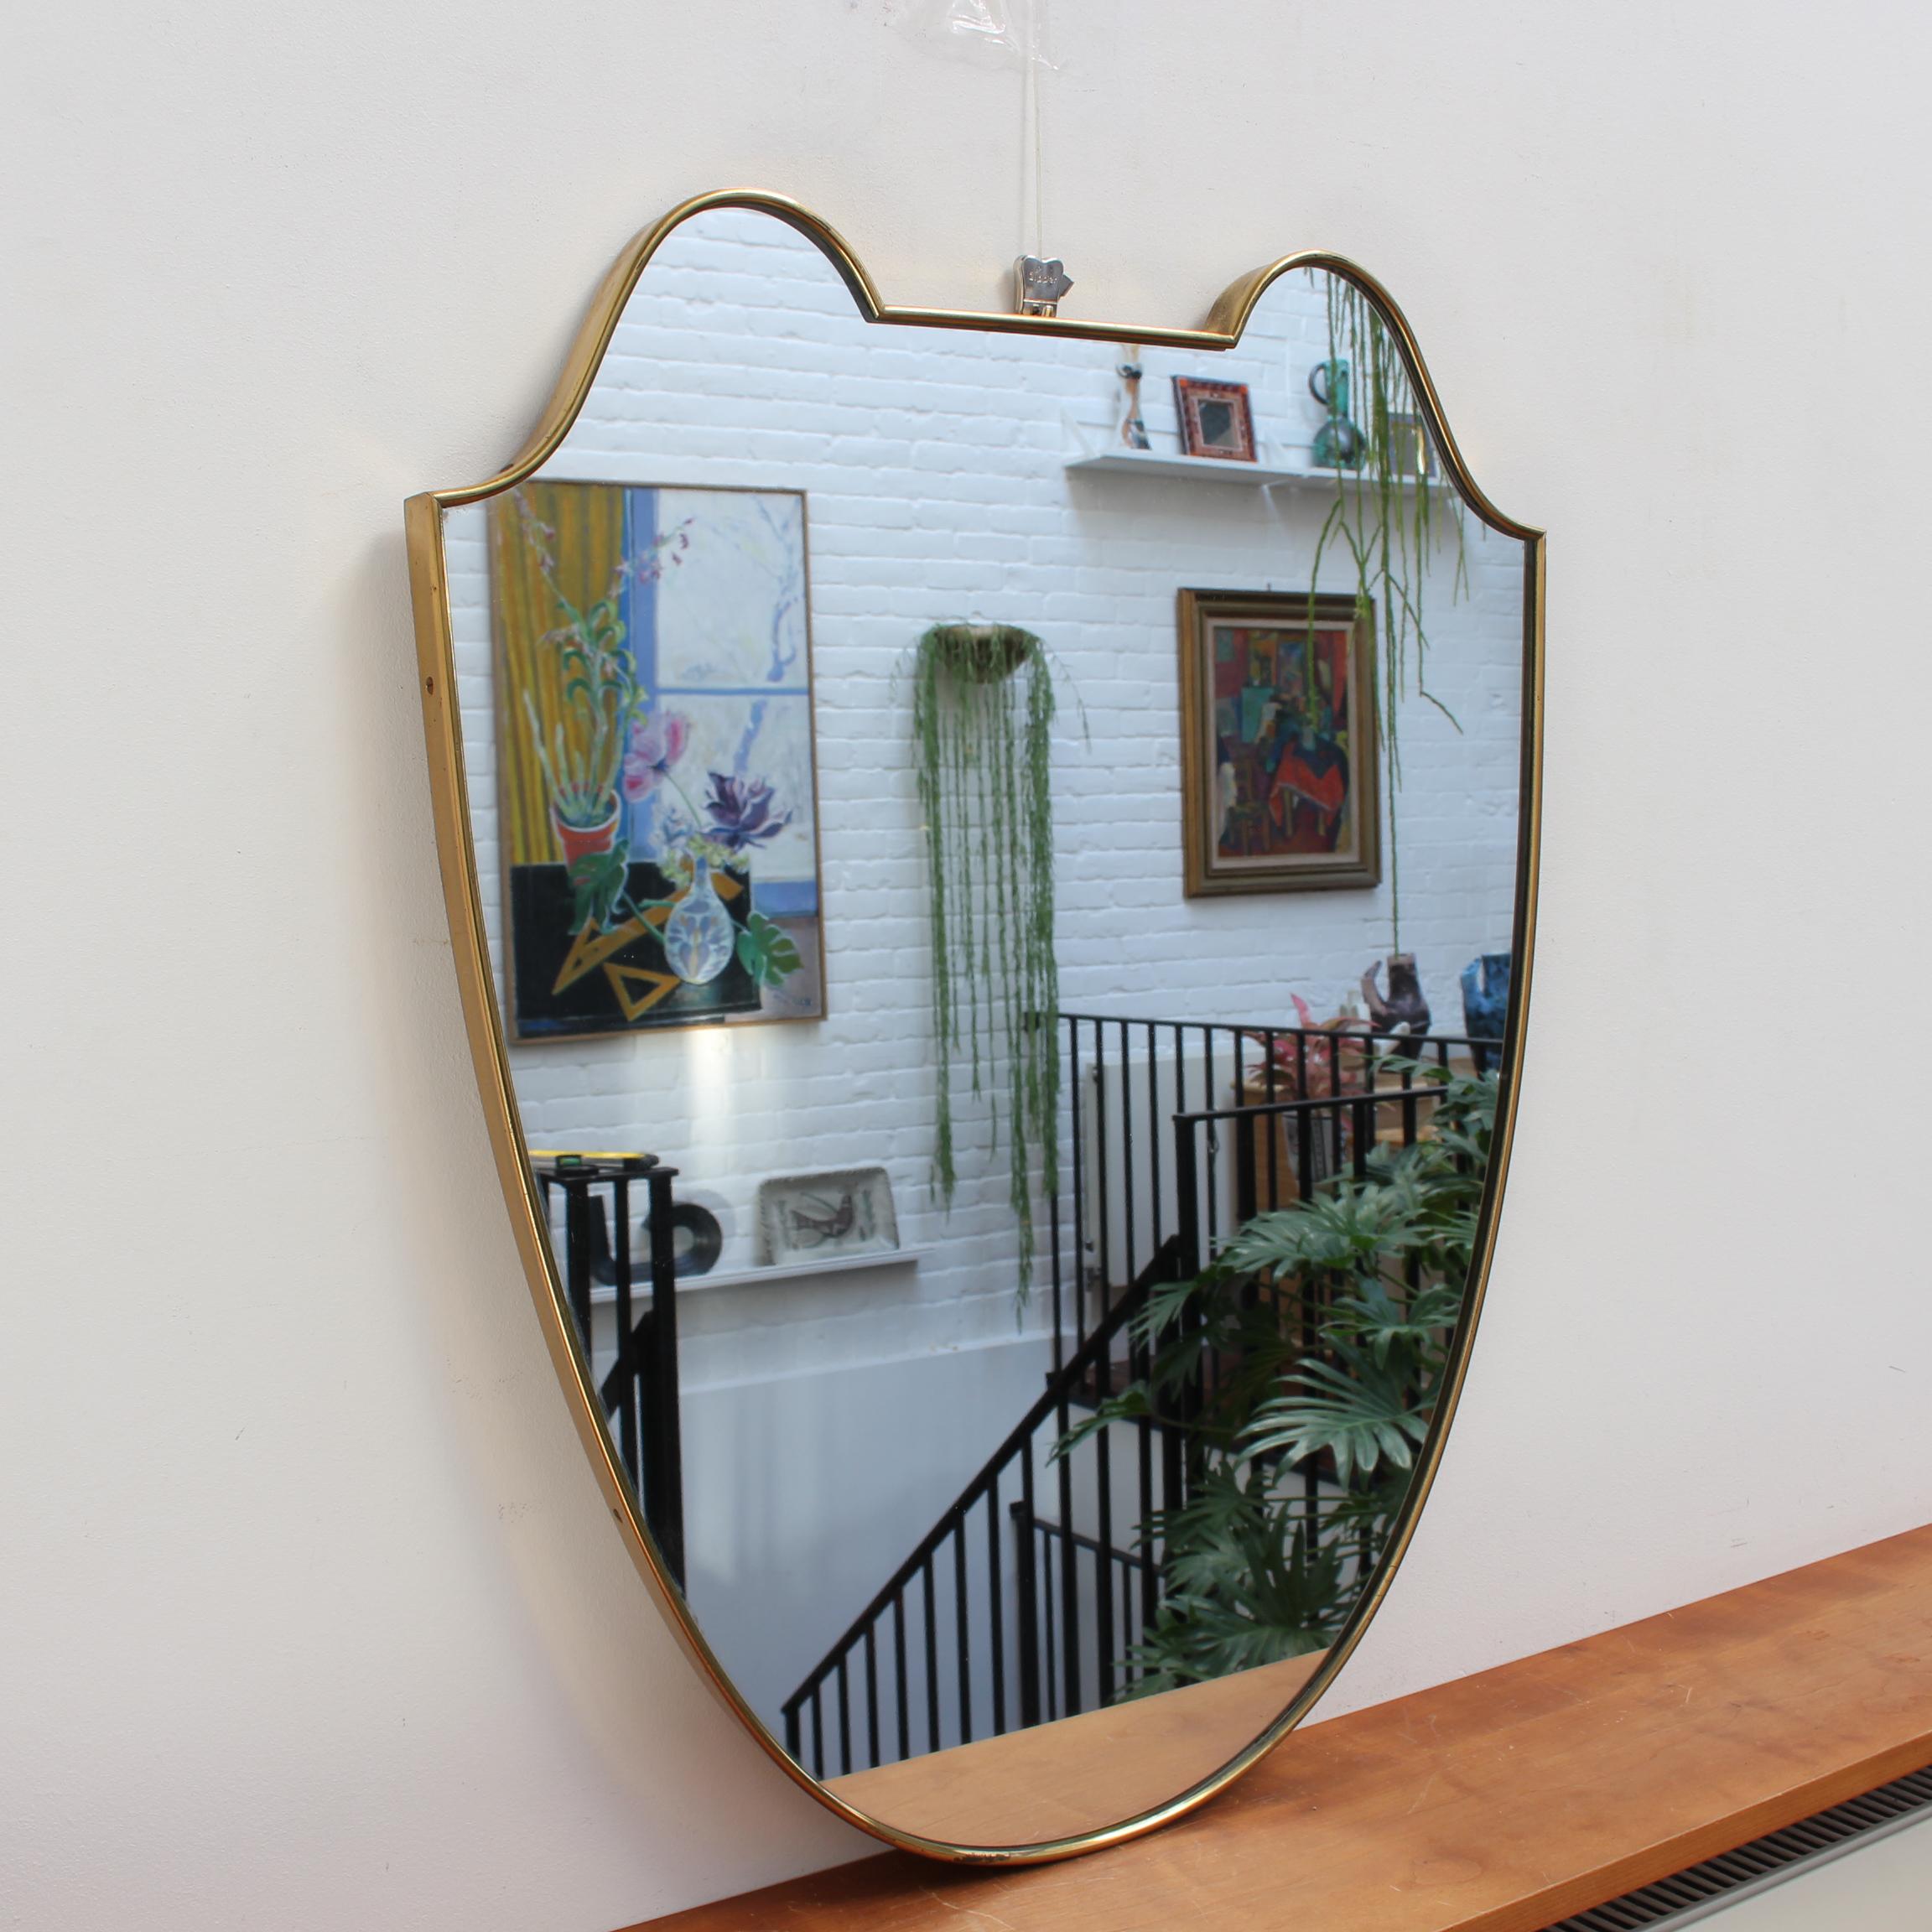 Mid-century Italian wall mirror with brass frame (circa 1950s). The mirror is classically-shaped and distinctive in a Modern style. It is in good overall condition including the glass. The frame presents an age-related patina which simply adds